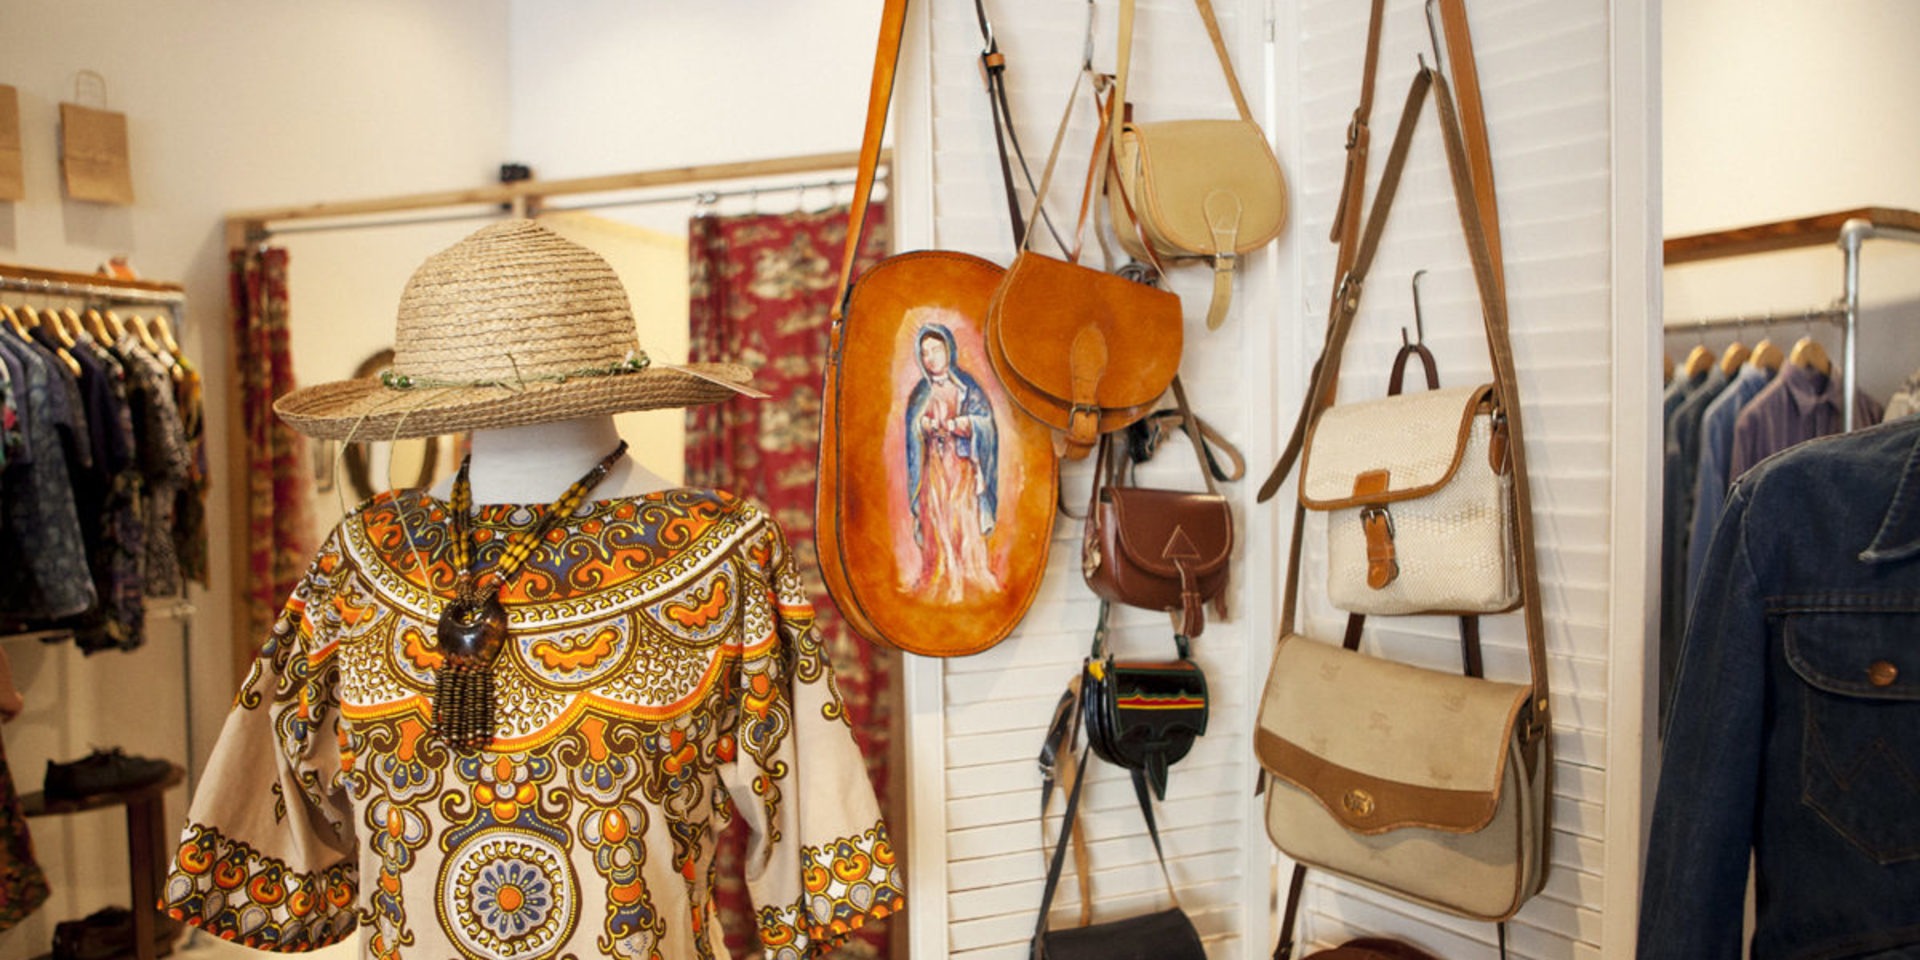 The ultimate guide to vintage shopping in Montréal